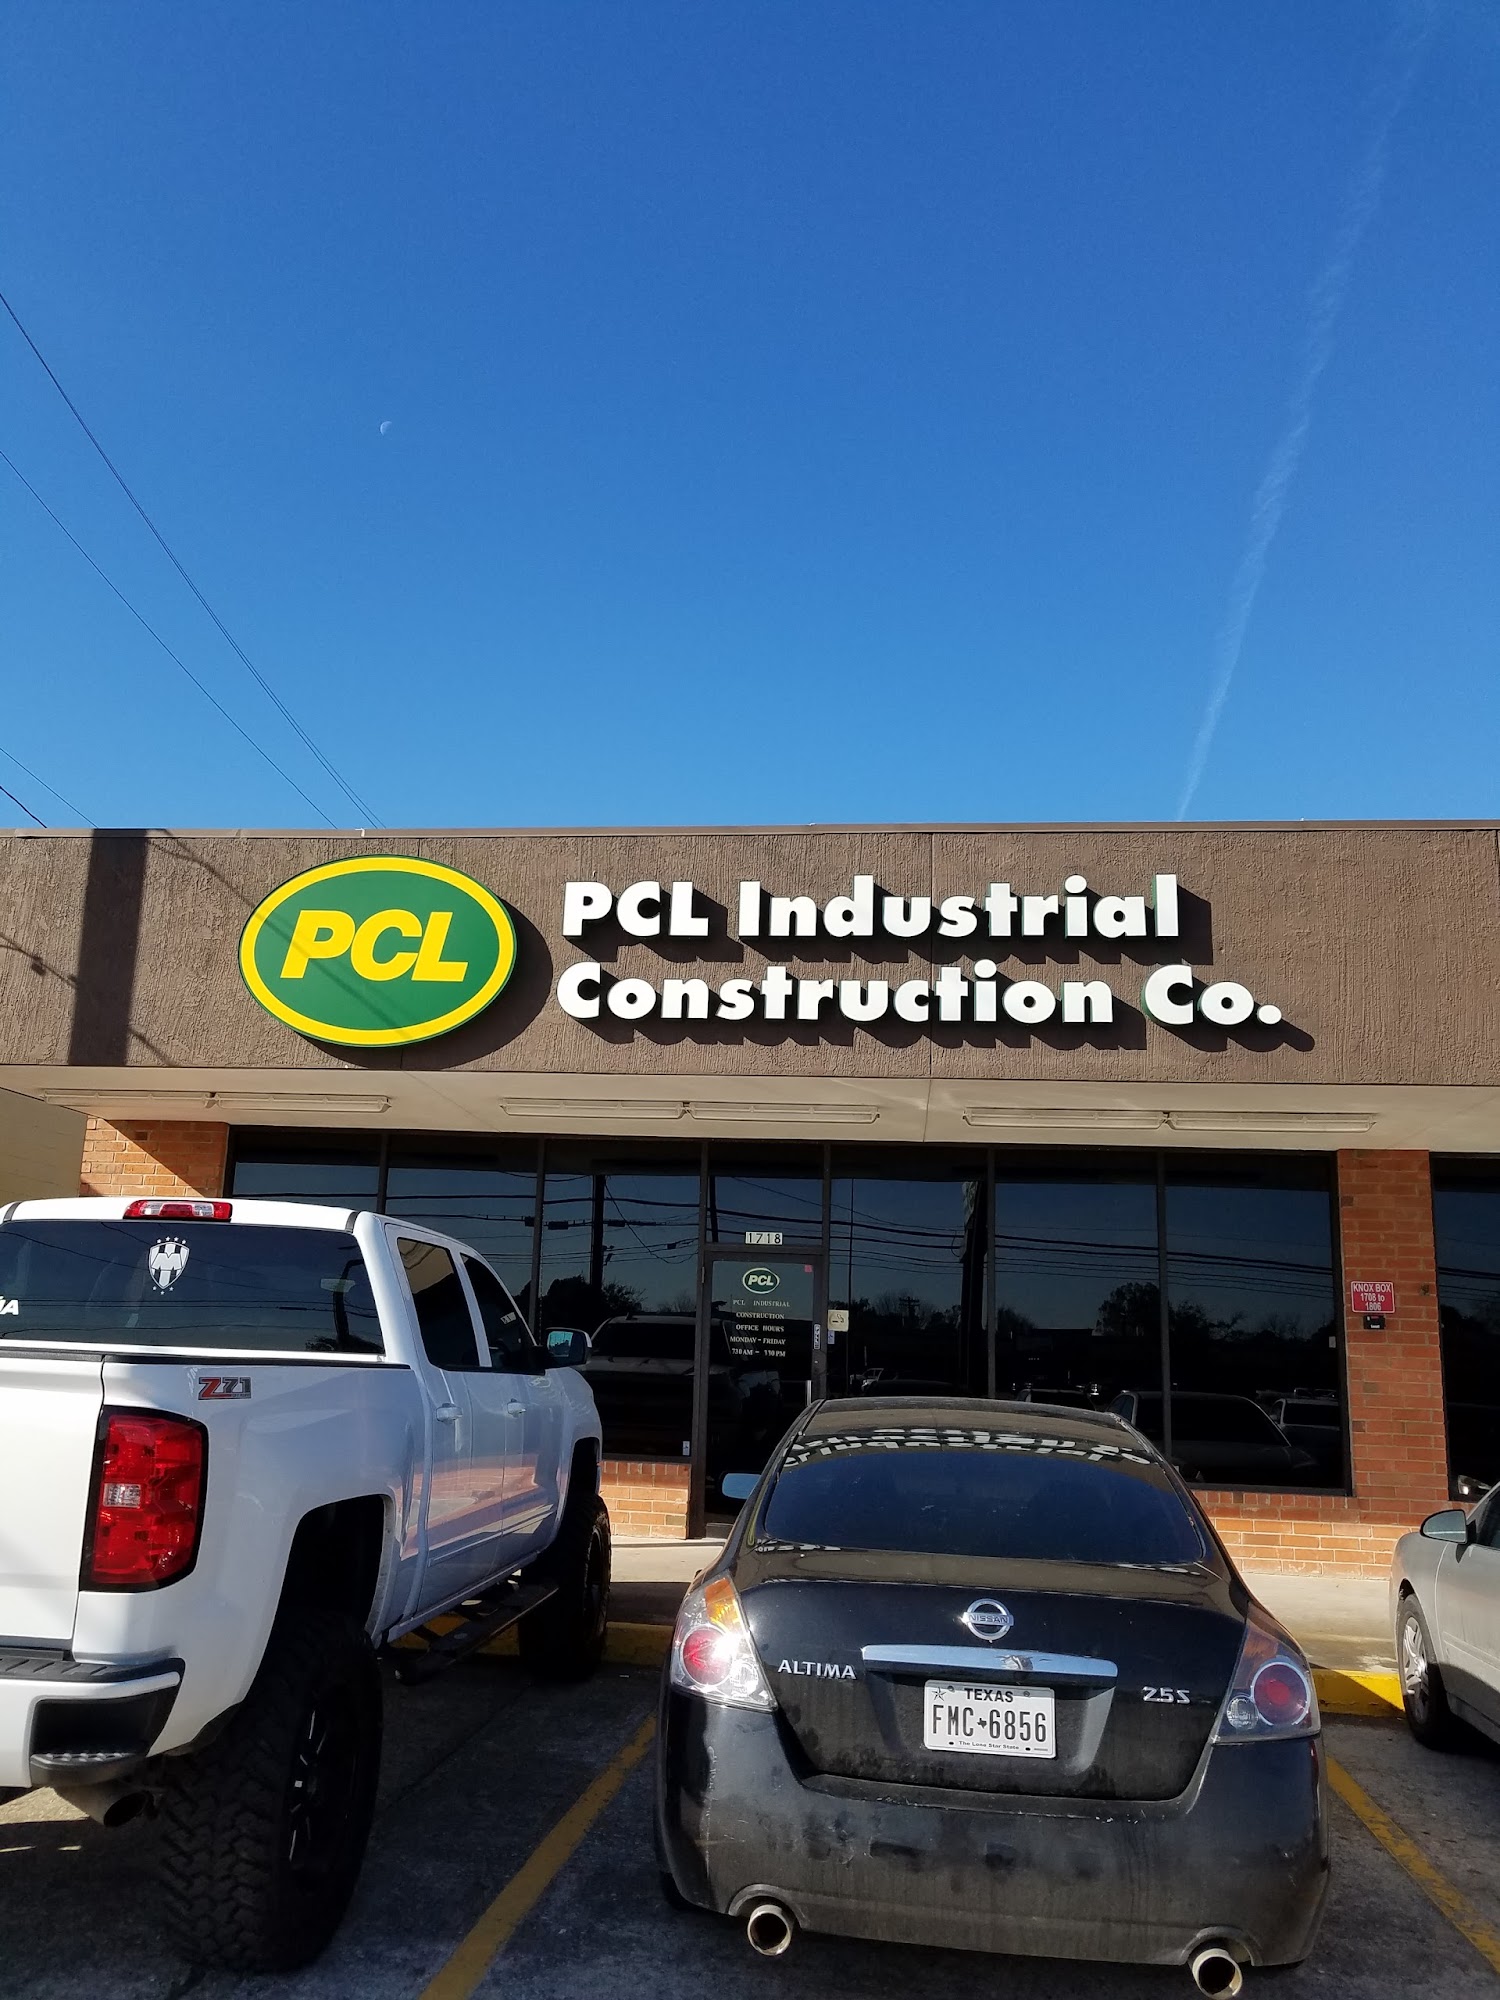 PCL Industrial Construction